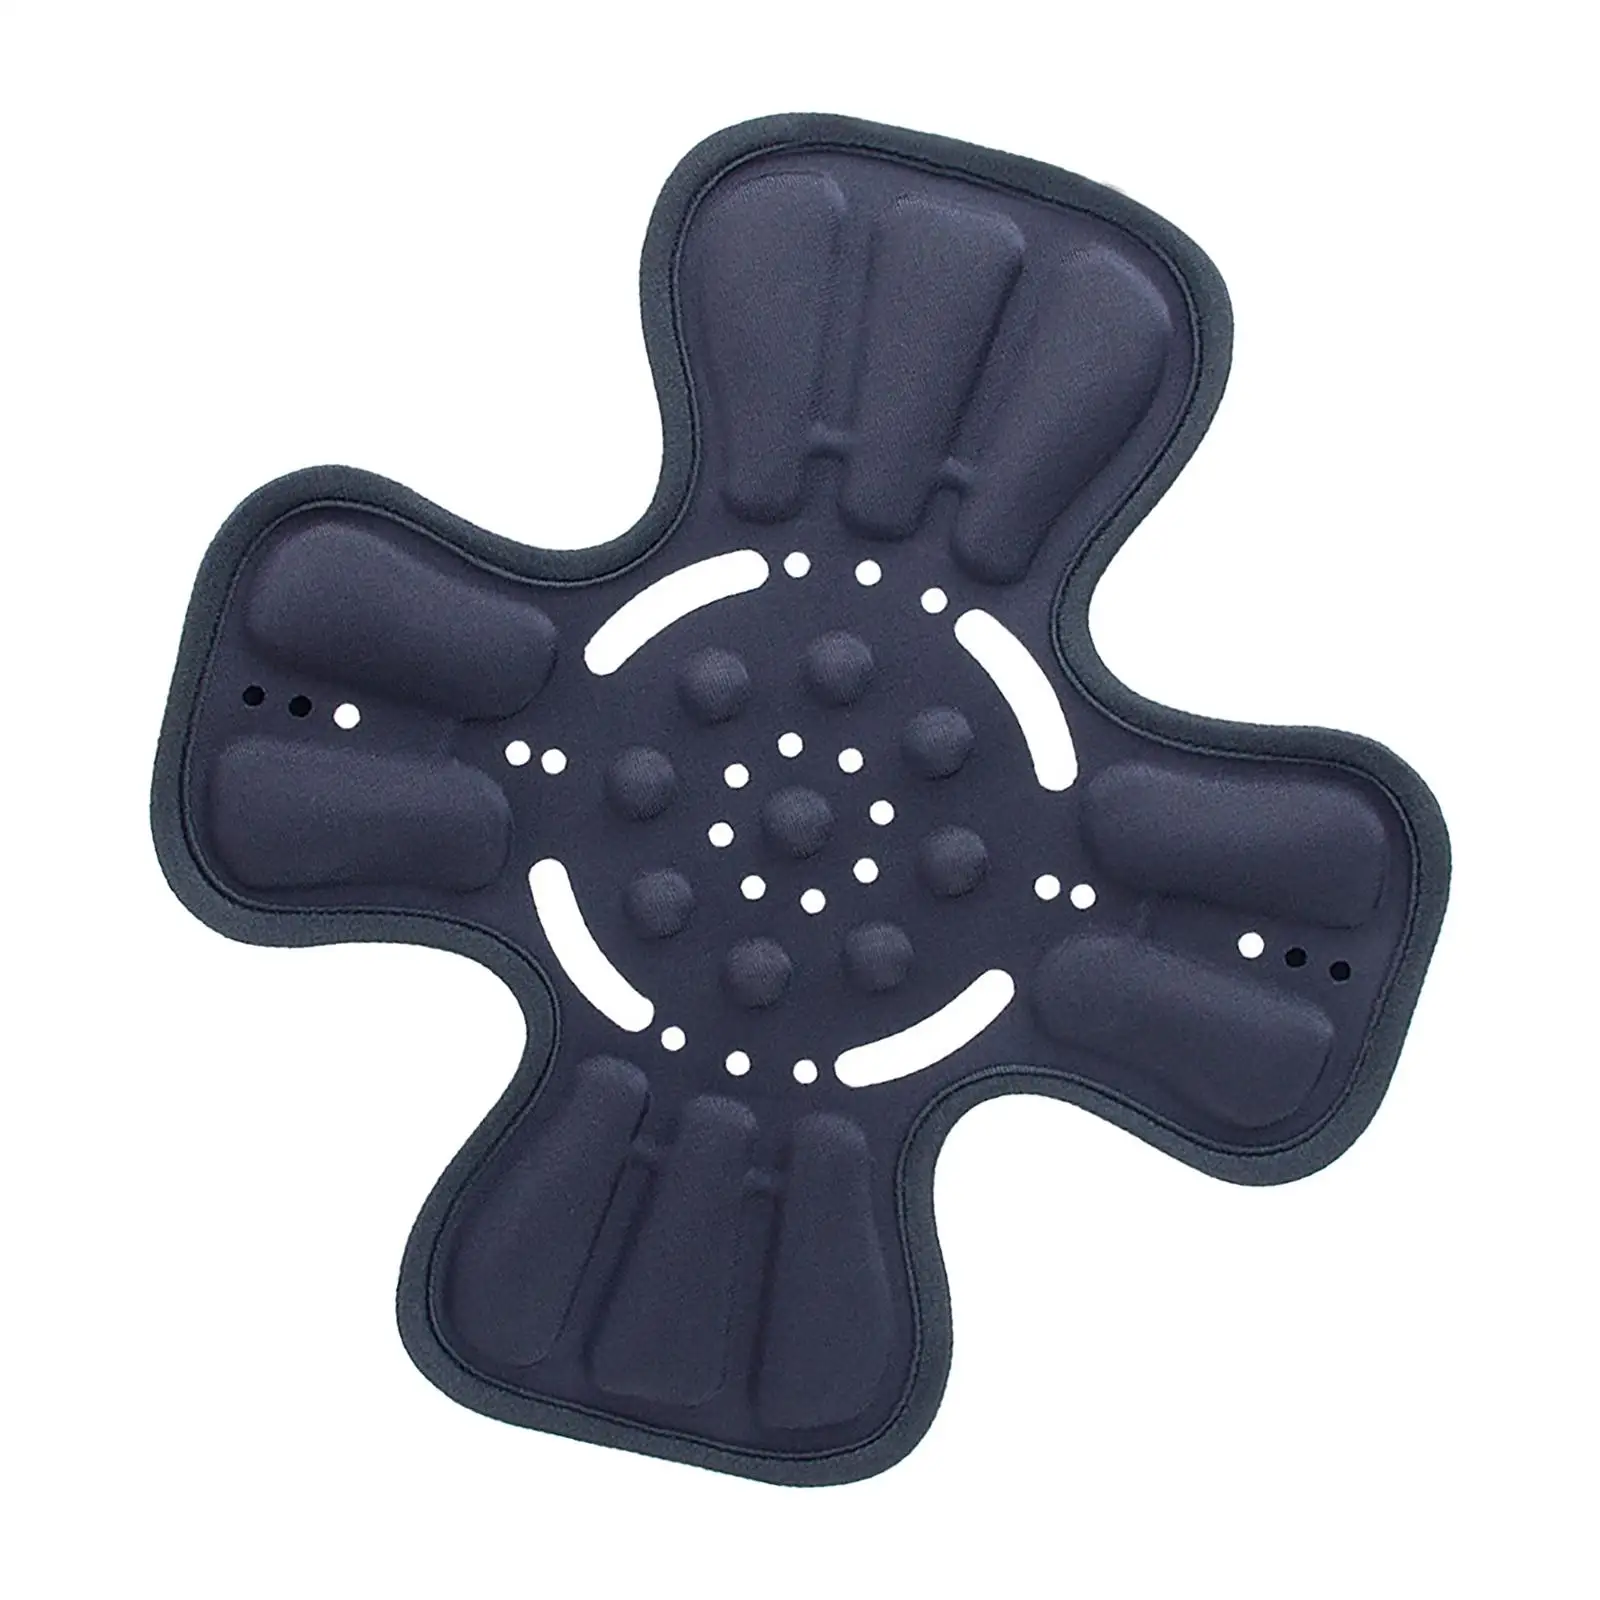 Liner Pad Parts Protection Insert Washable Cushion Padding Universal Protection Pad Reusable Breathable for Motorbike